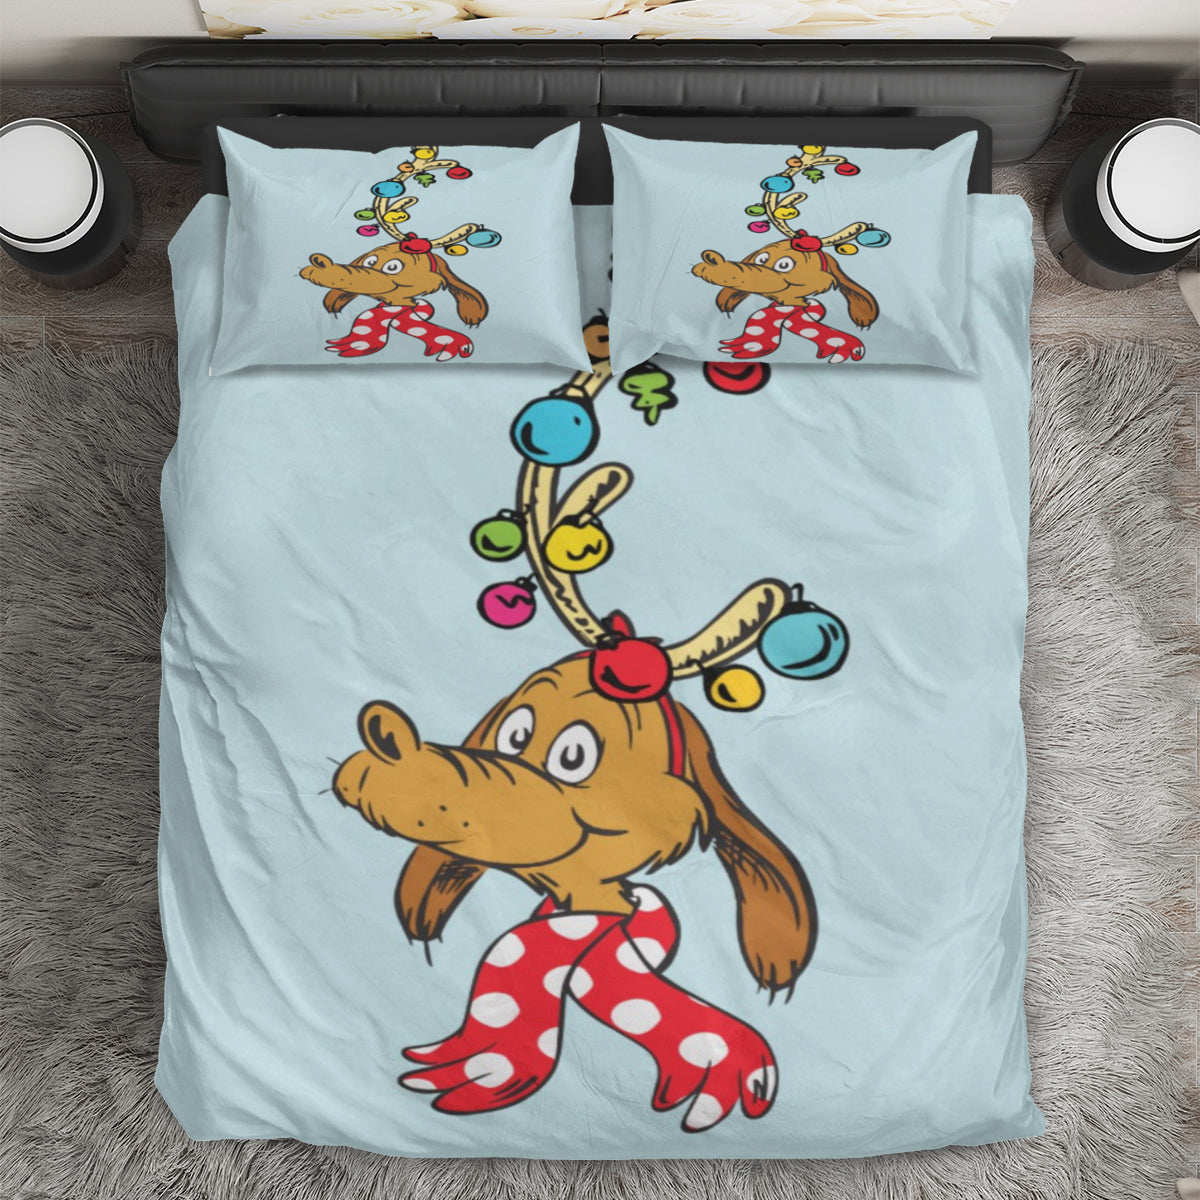 The Grinch Christmas Max 1 3PCS Bedding Set Duvet Cover And Pillow Cases Gift For Fan